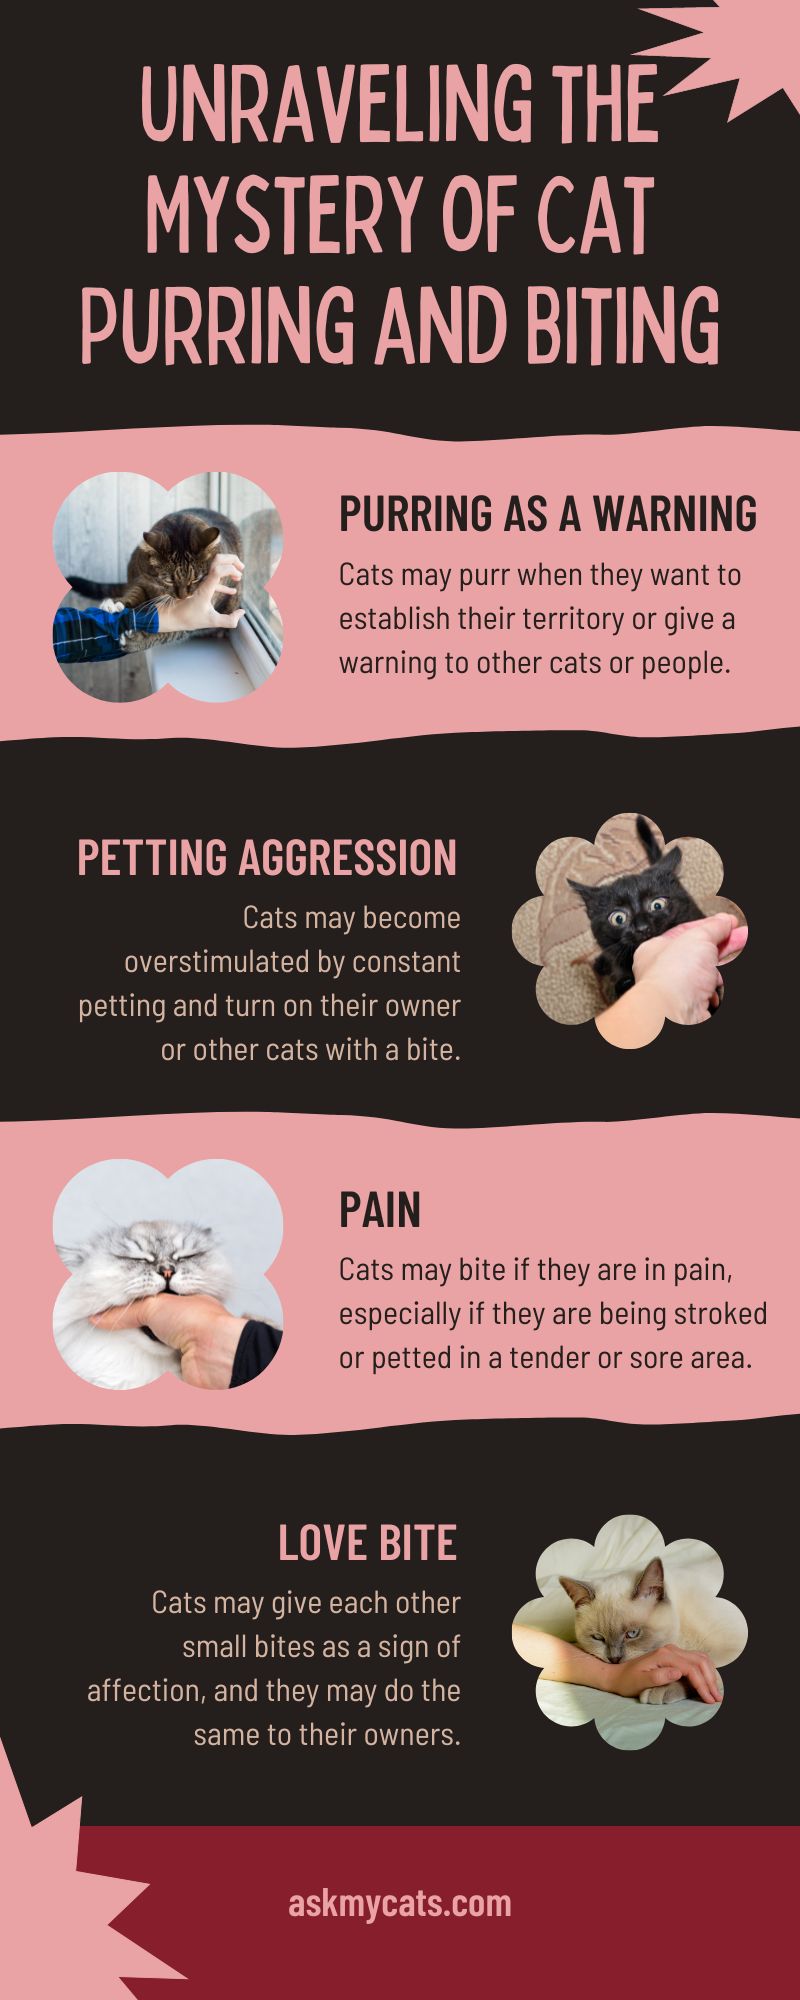 Unraveling the Mystery of Cat Purring and Biting (Infographic)